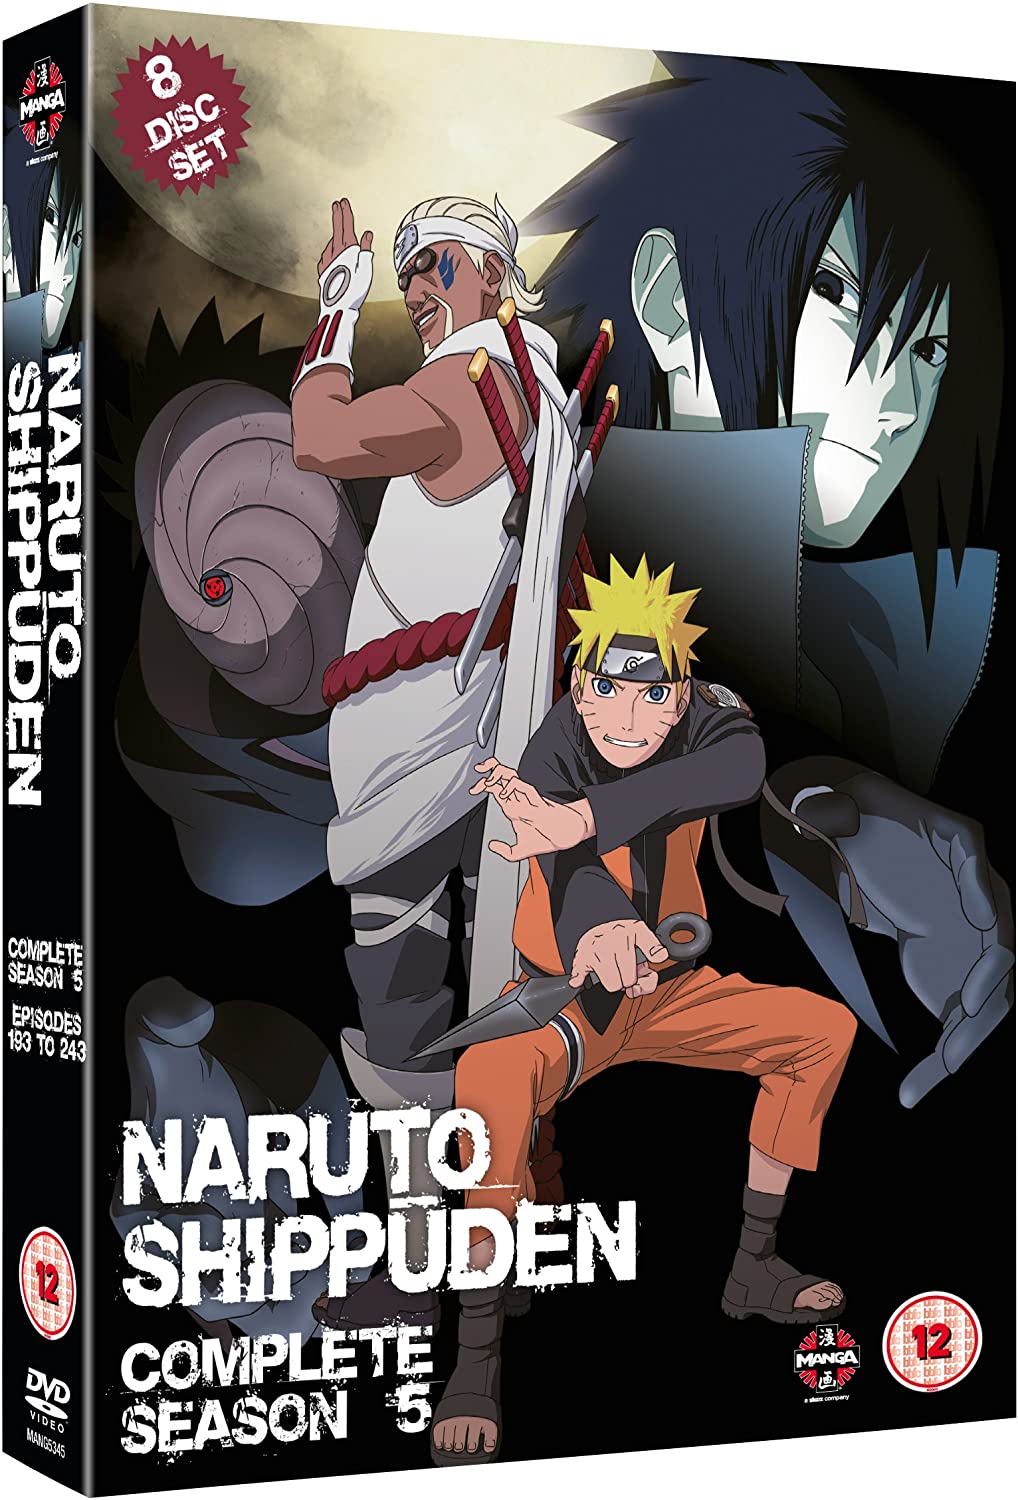 Naruto Shippuden Complete Series 5 (Episodes 193-244) - Action fiction  [DVD]